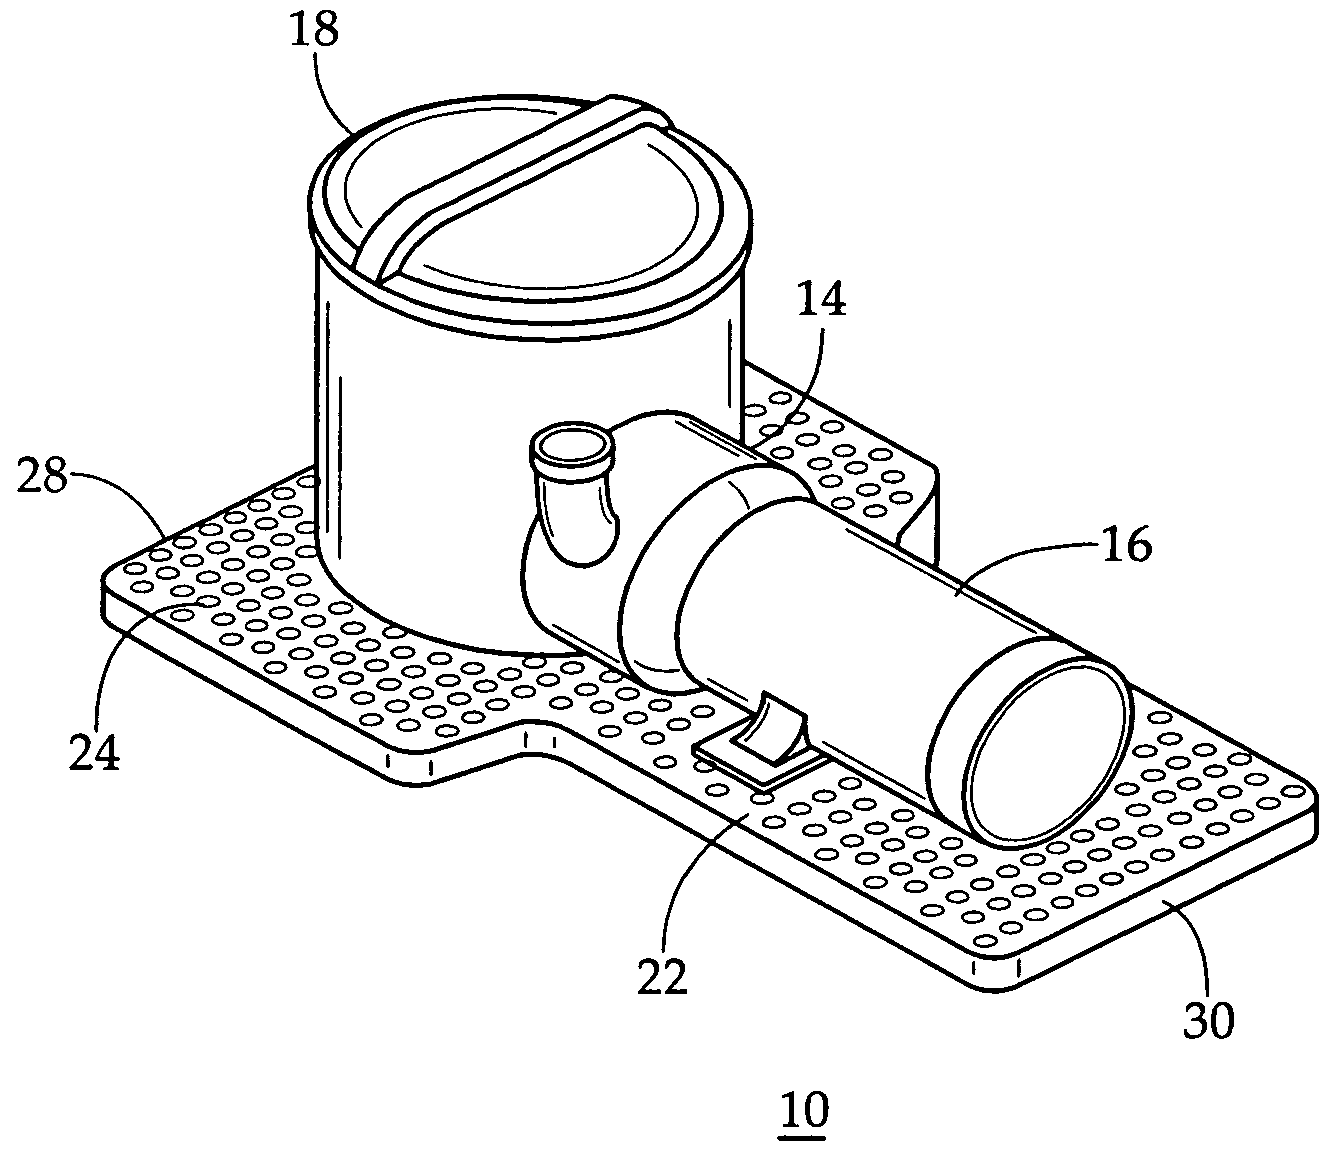 Pad for reducing or dampening noise or vibration